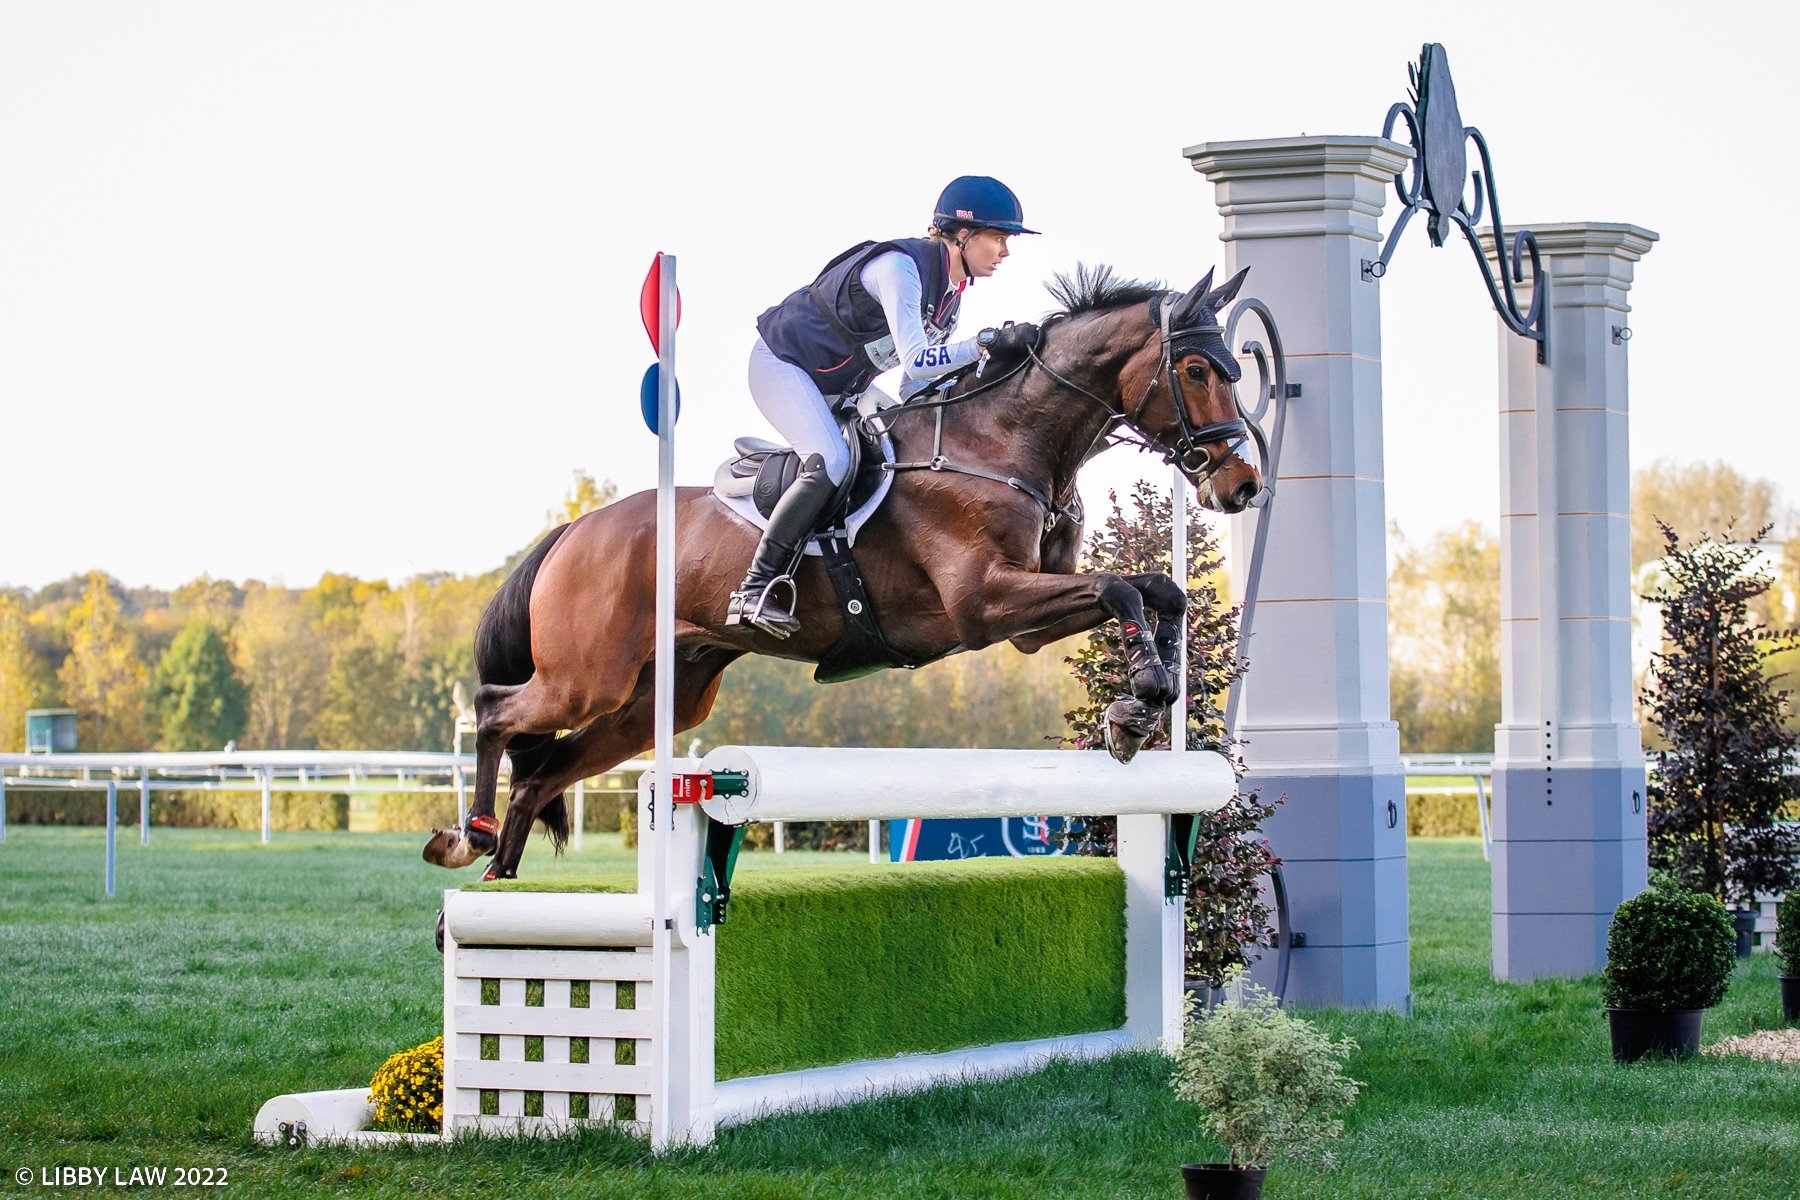 HSH Connor PC USA Eventing; Libby Law 1.jpg